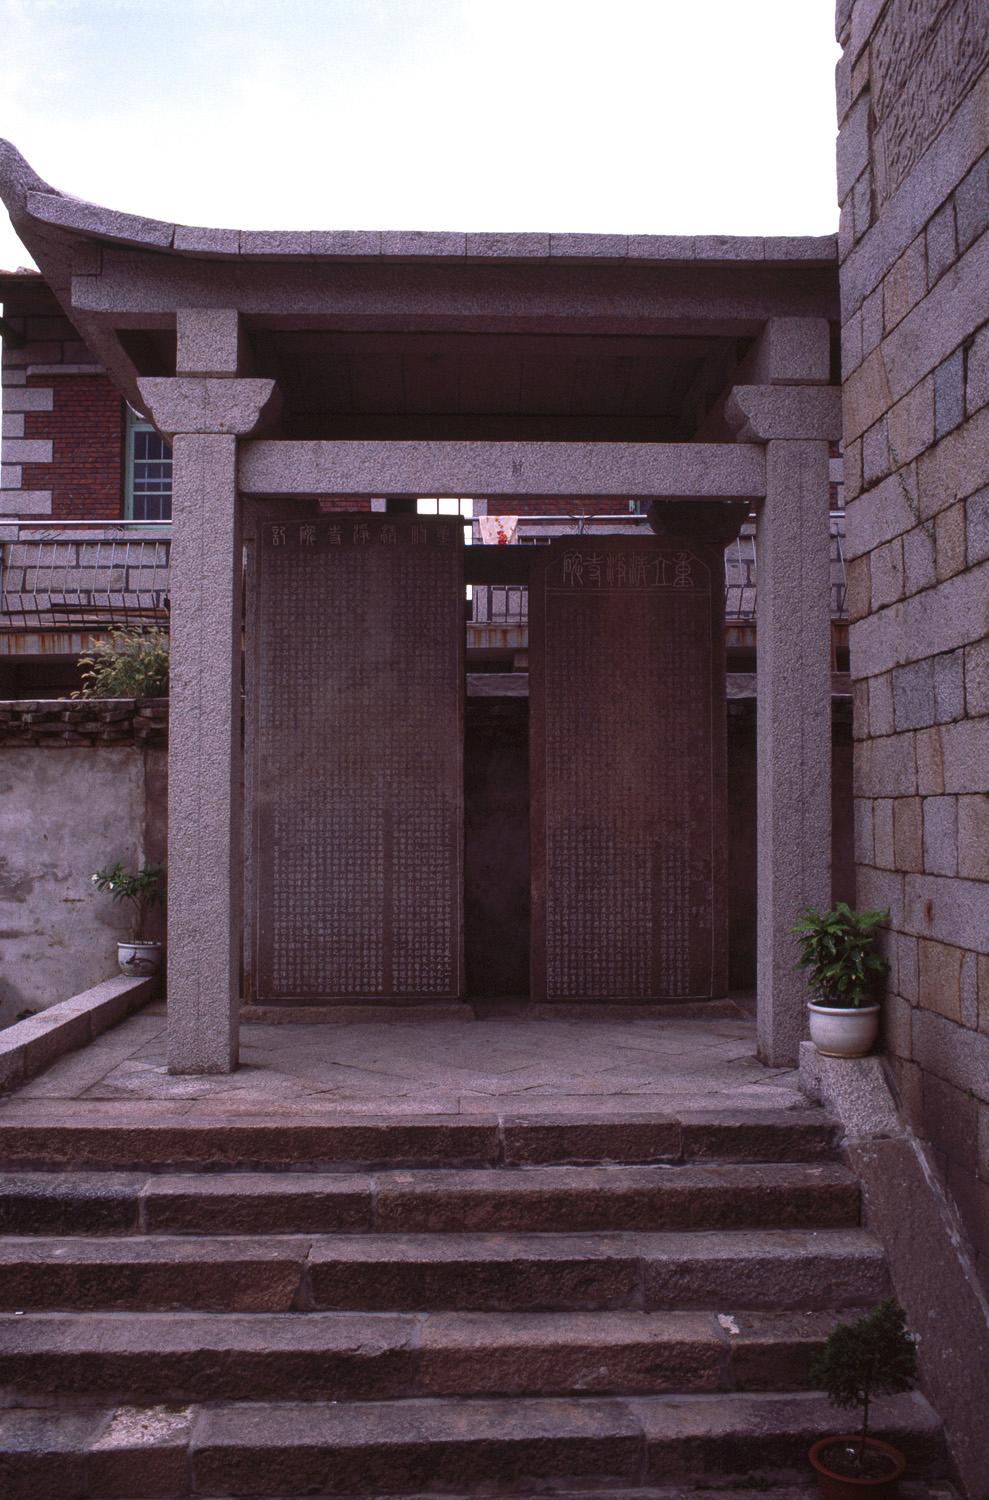 View looking at inscribed tablets across the court from the prayer hall